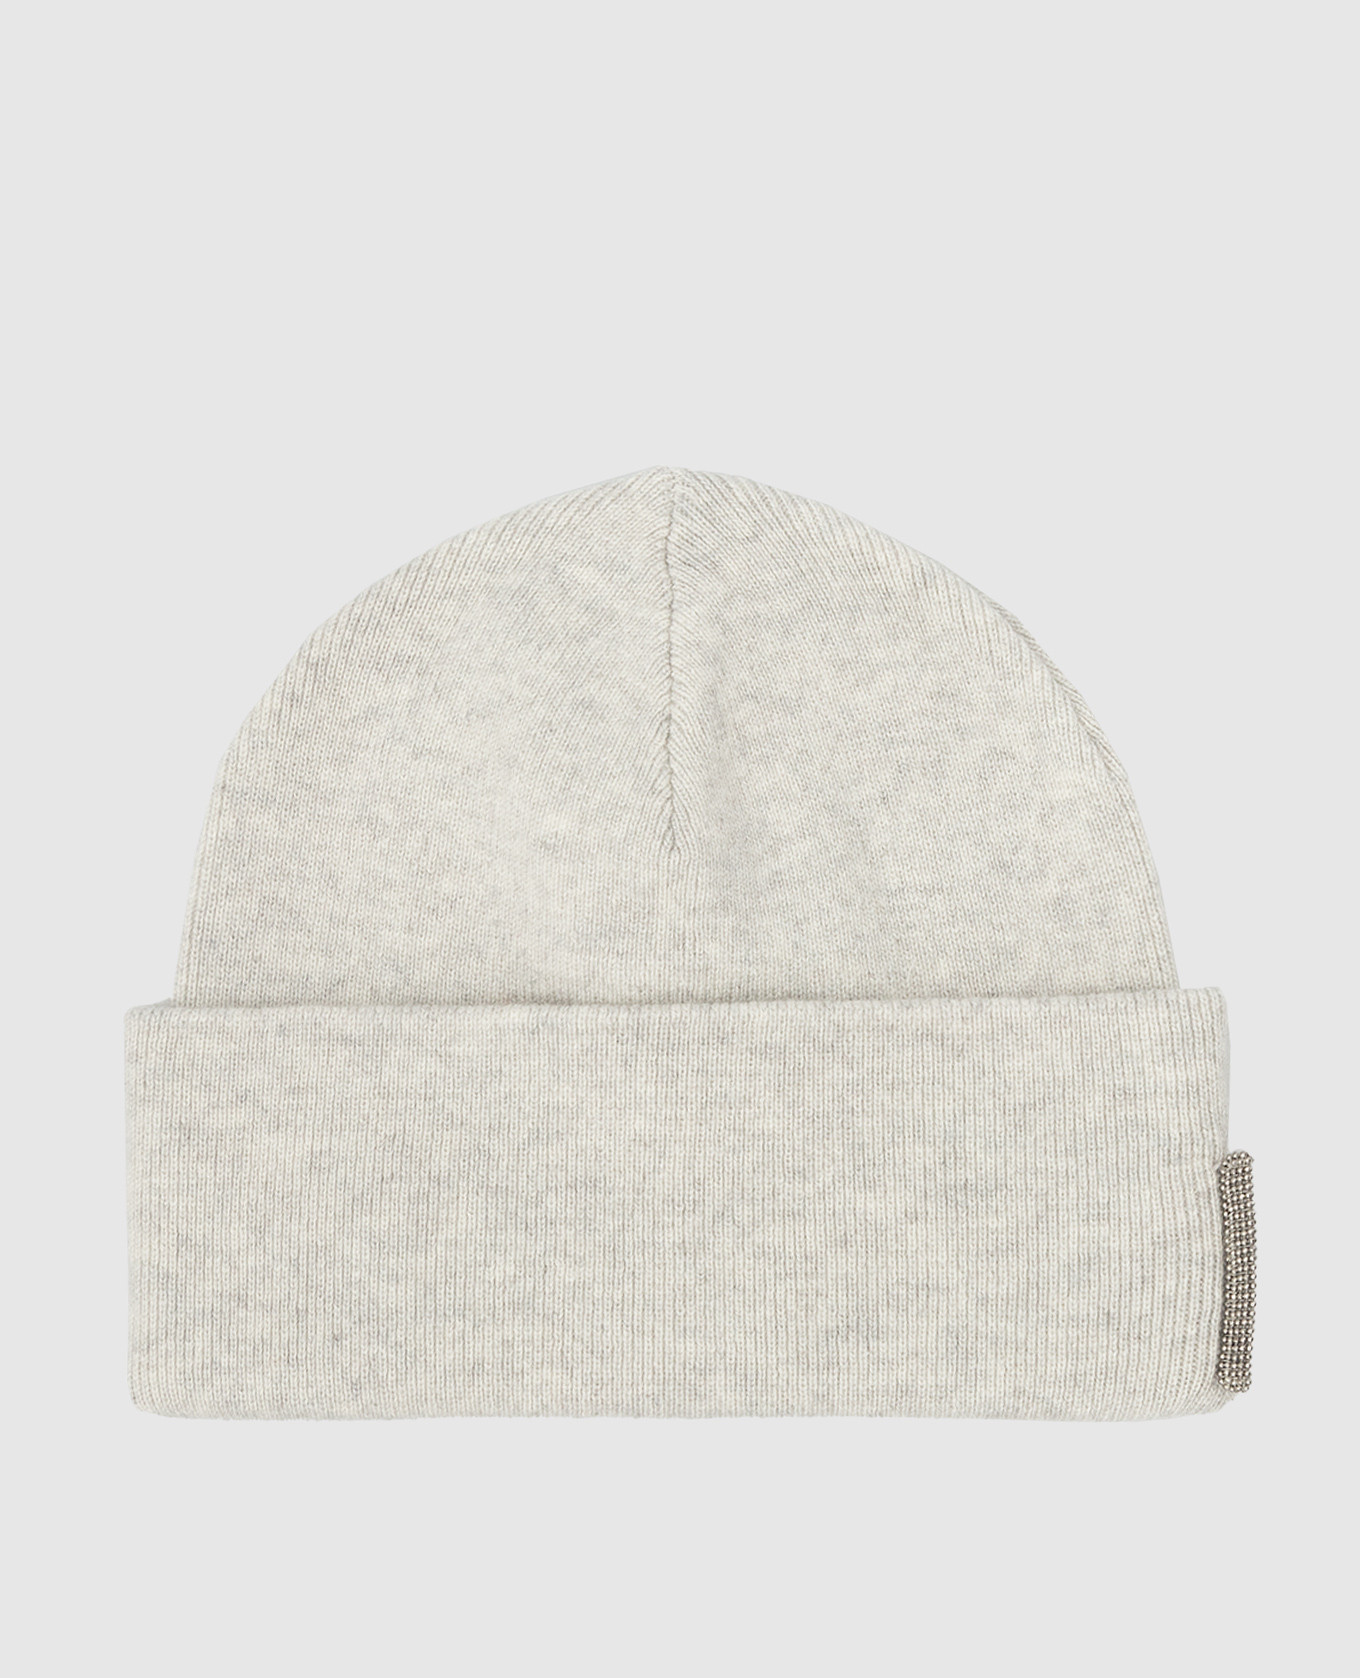 Children's light gray cashmere hat with chains